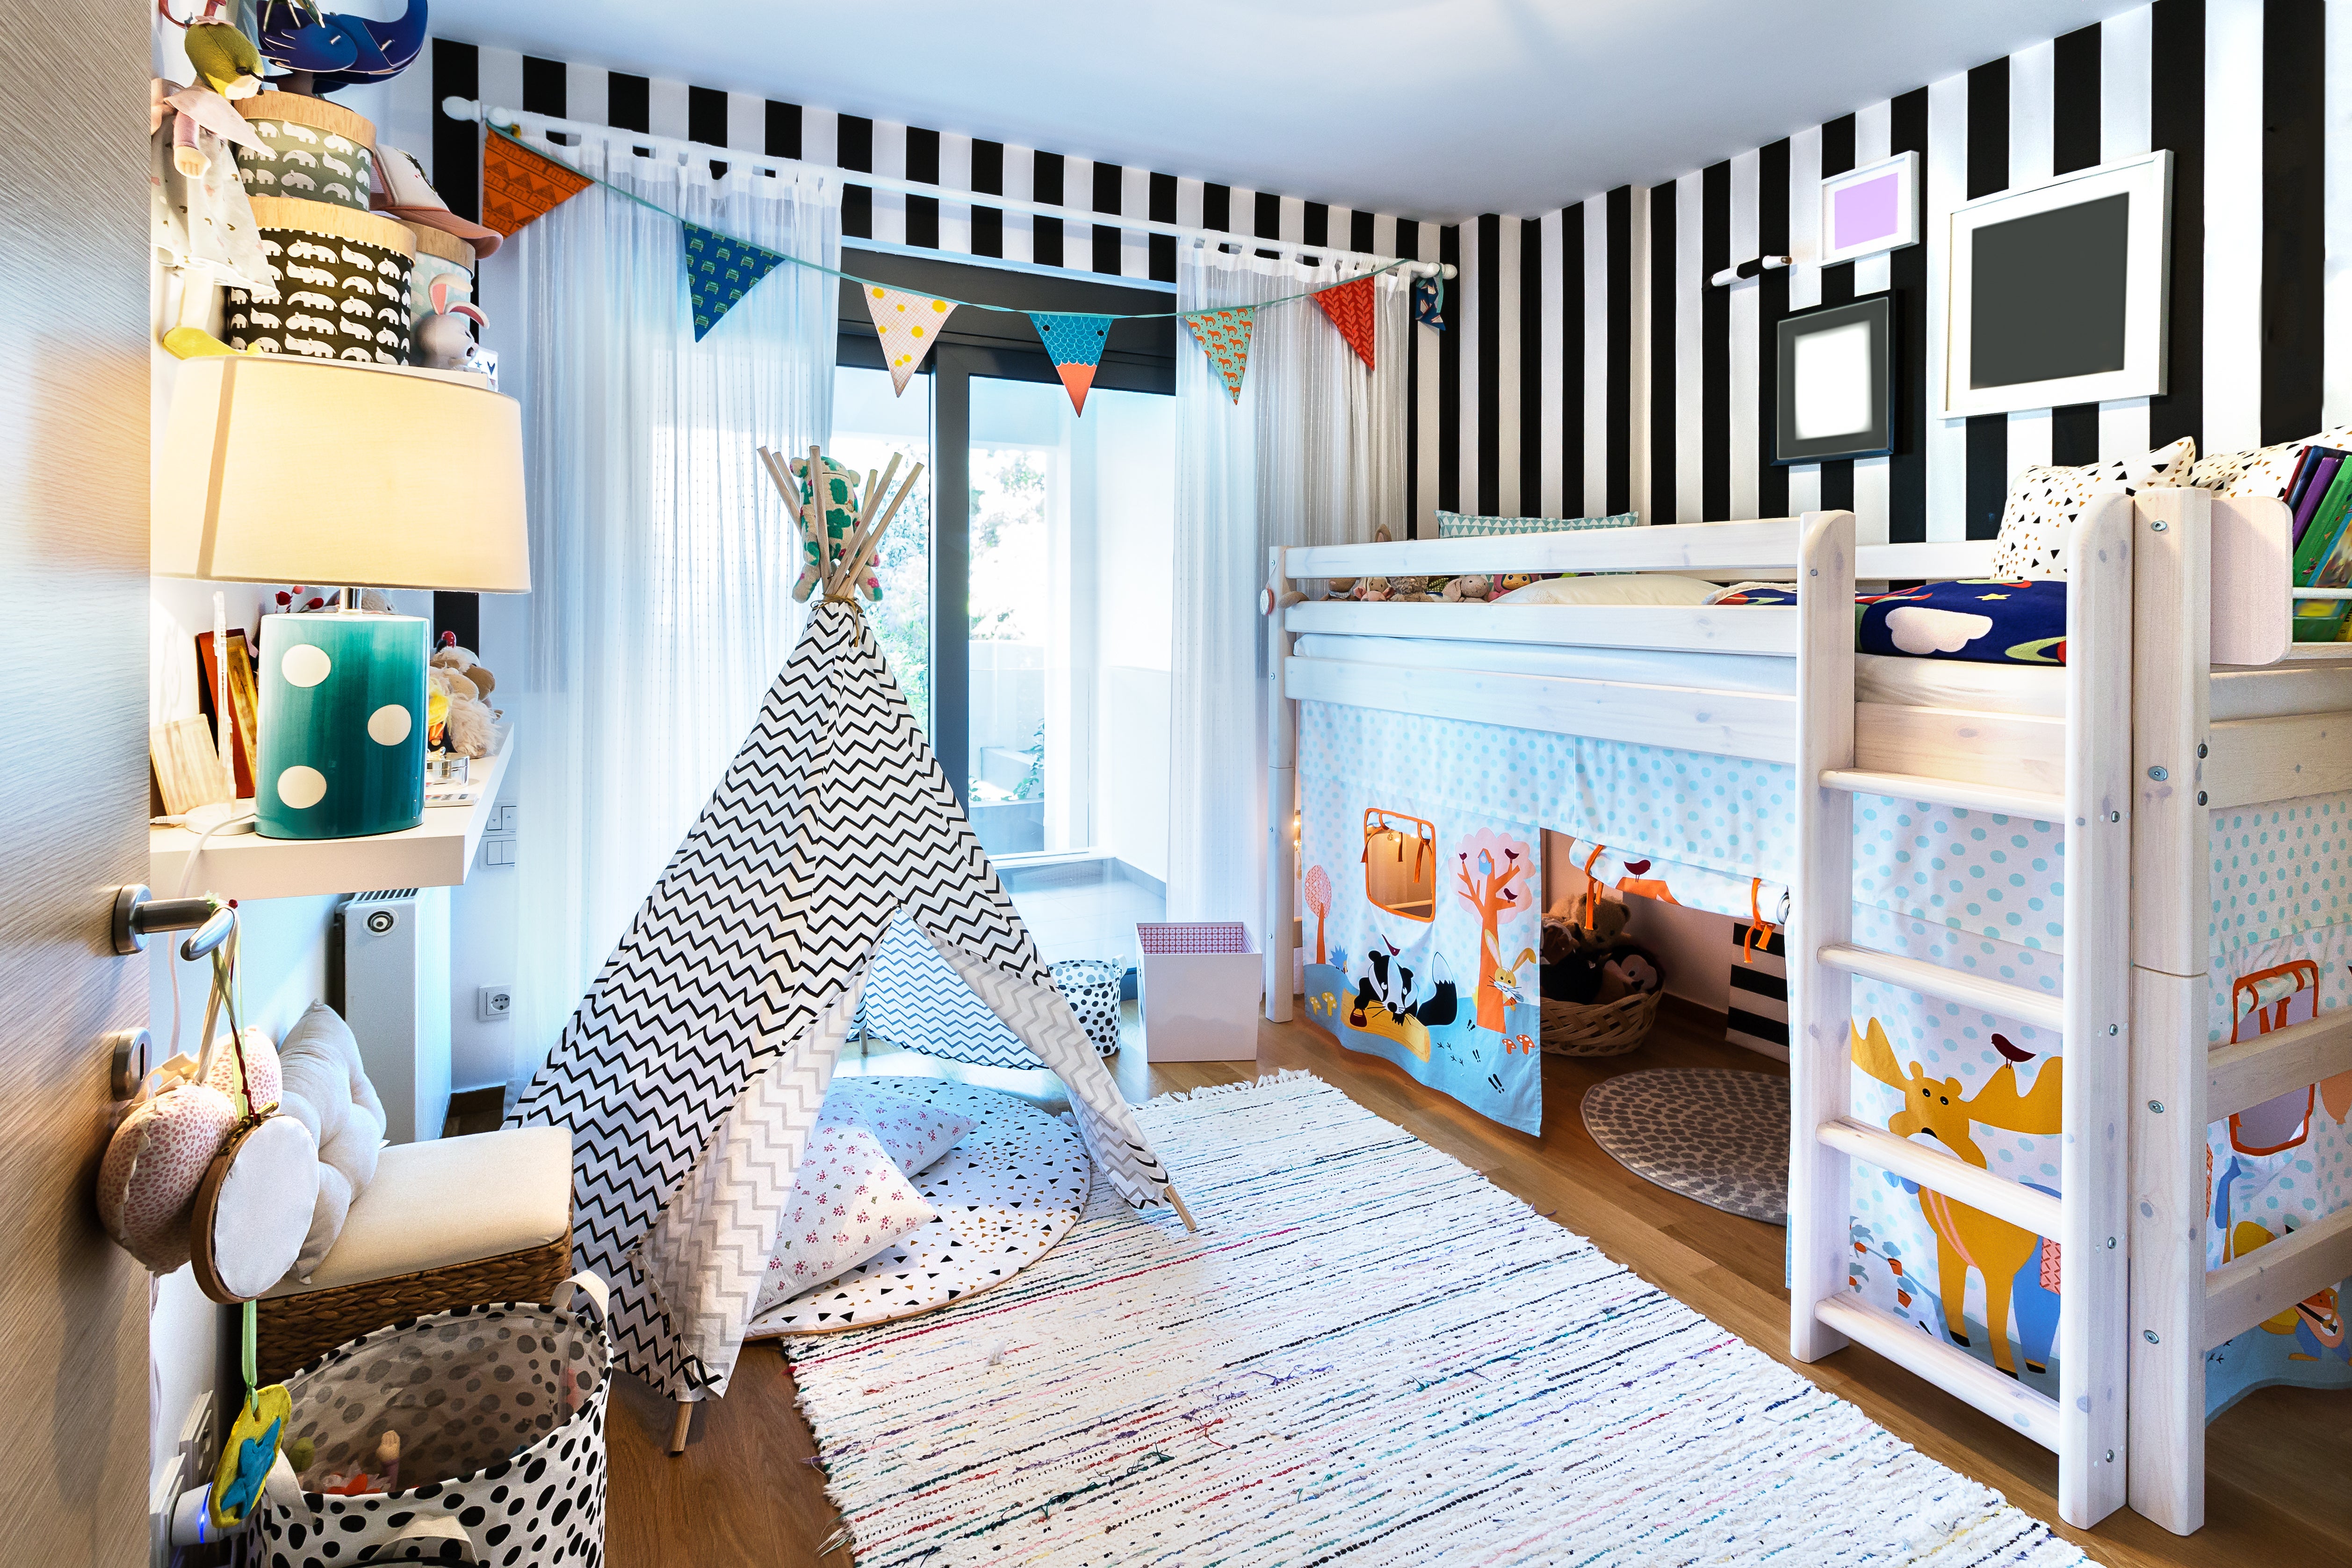 Tips For Decorating Your Child’s Room